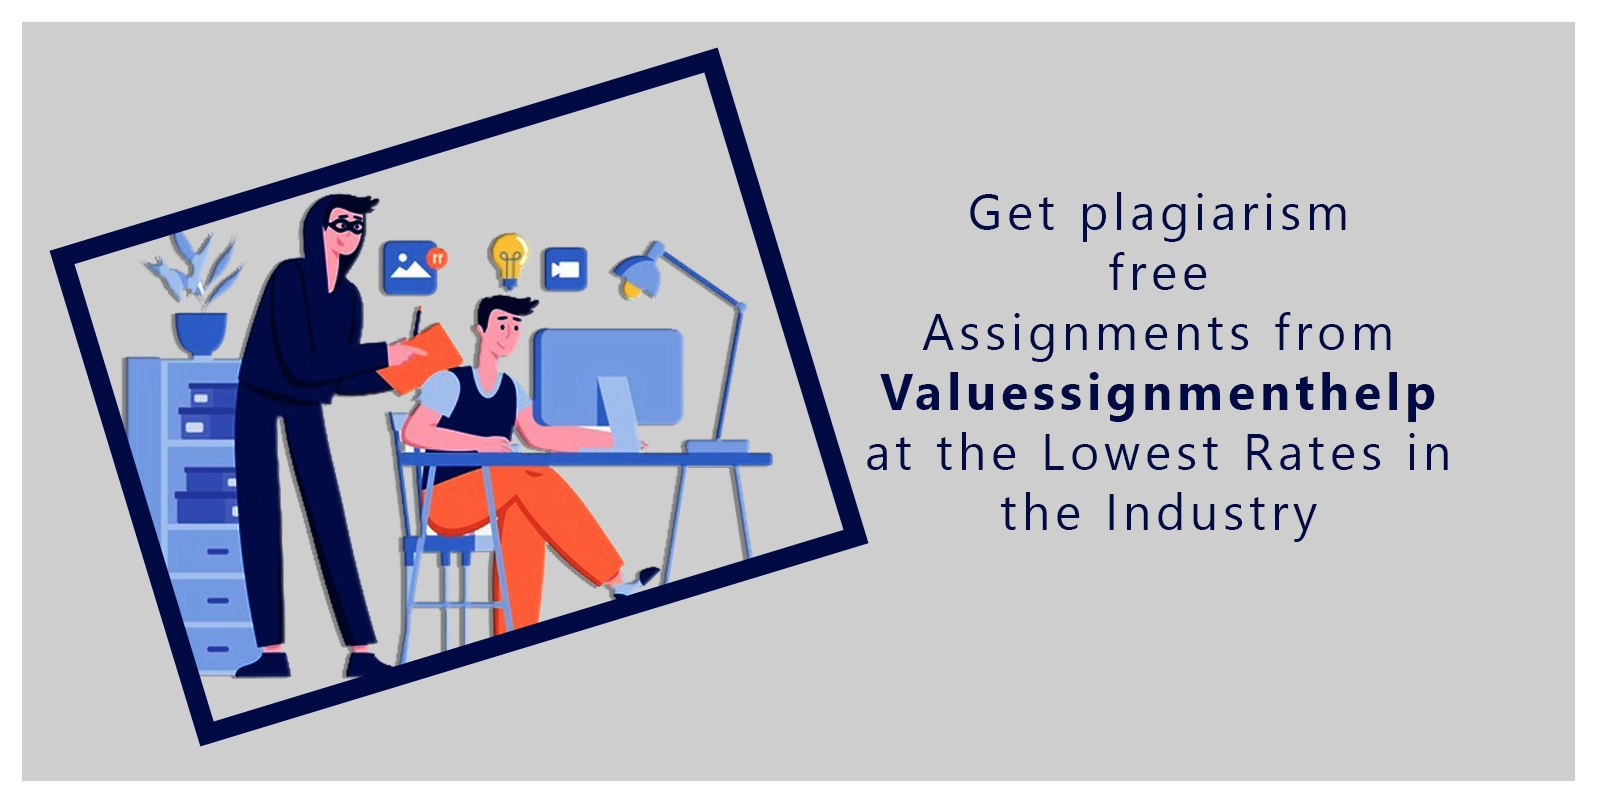  100%Plagiarism free solutions